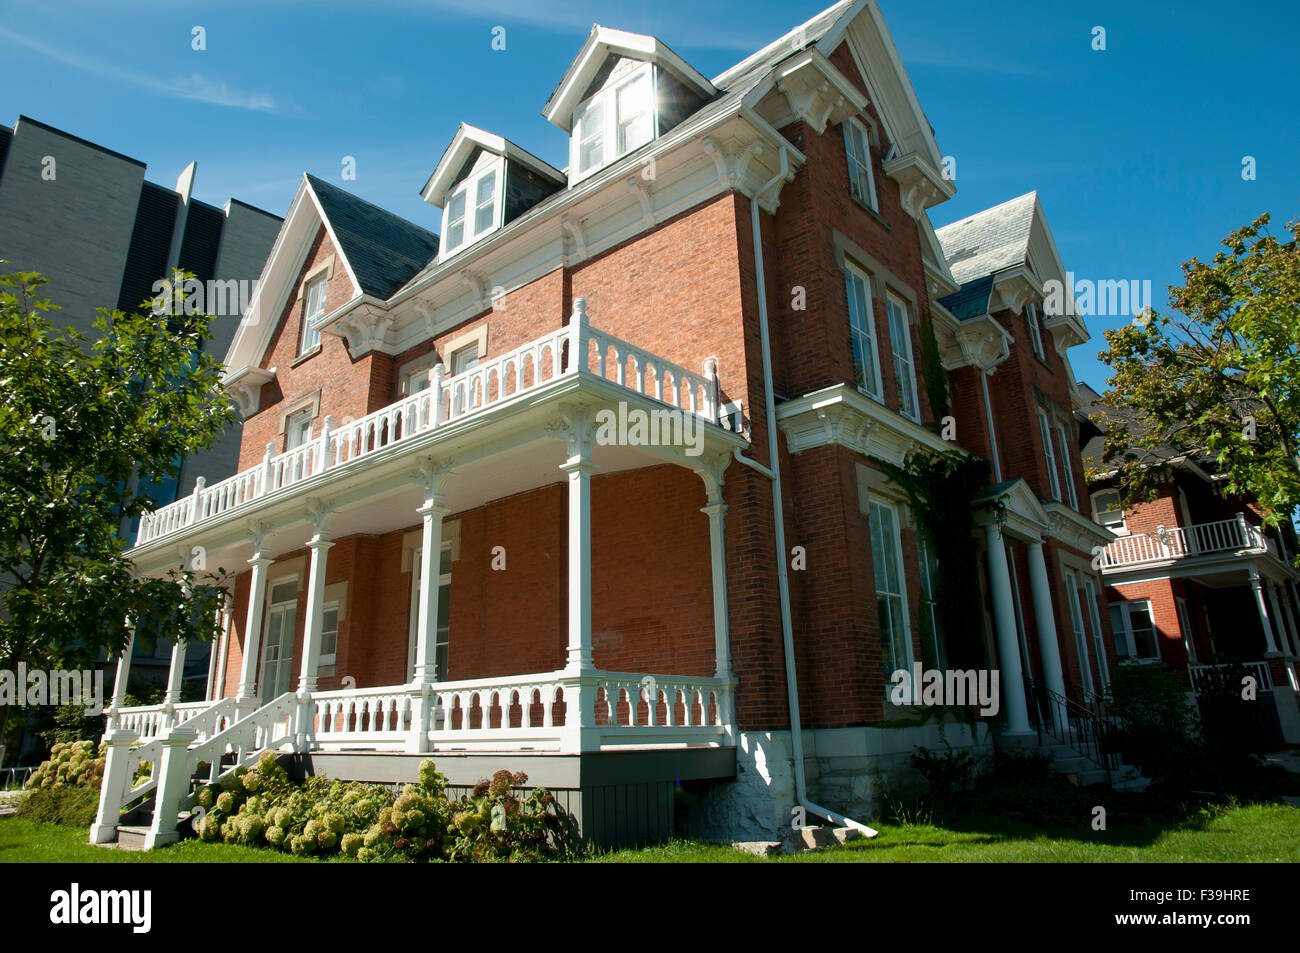 Abramsky House at Queen's University - Kingston - Canada Stock Photo